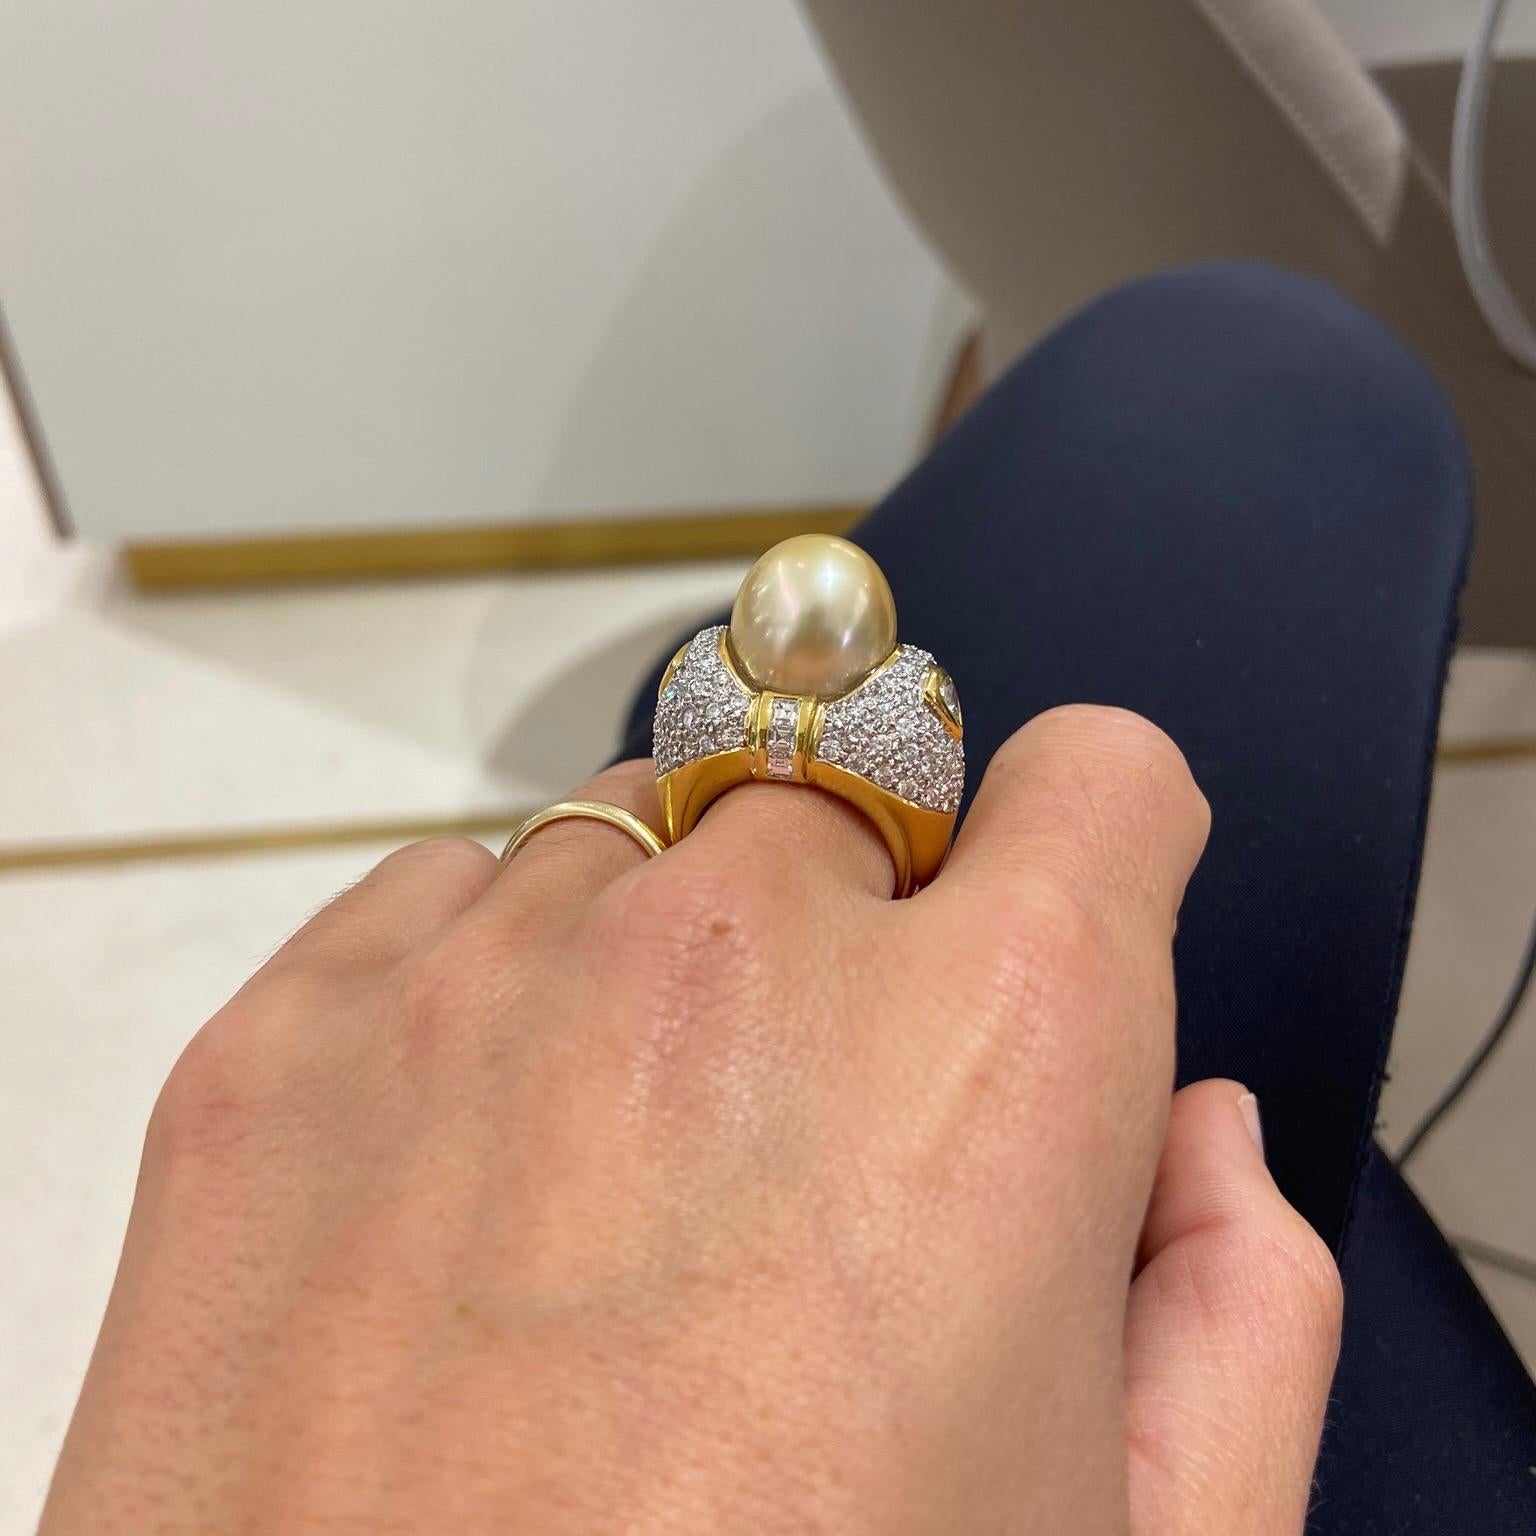 Cellini 18 Karat Yellow Gold, 3.60 Carat Diamond and South Sea Golden Pearl Ring For Sale 3